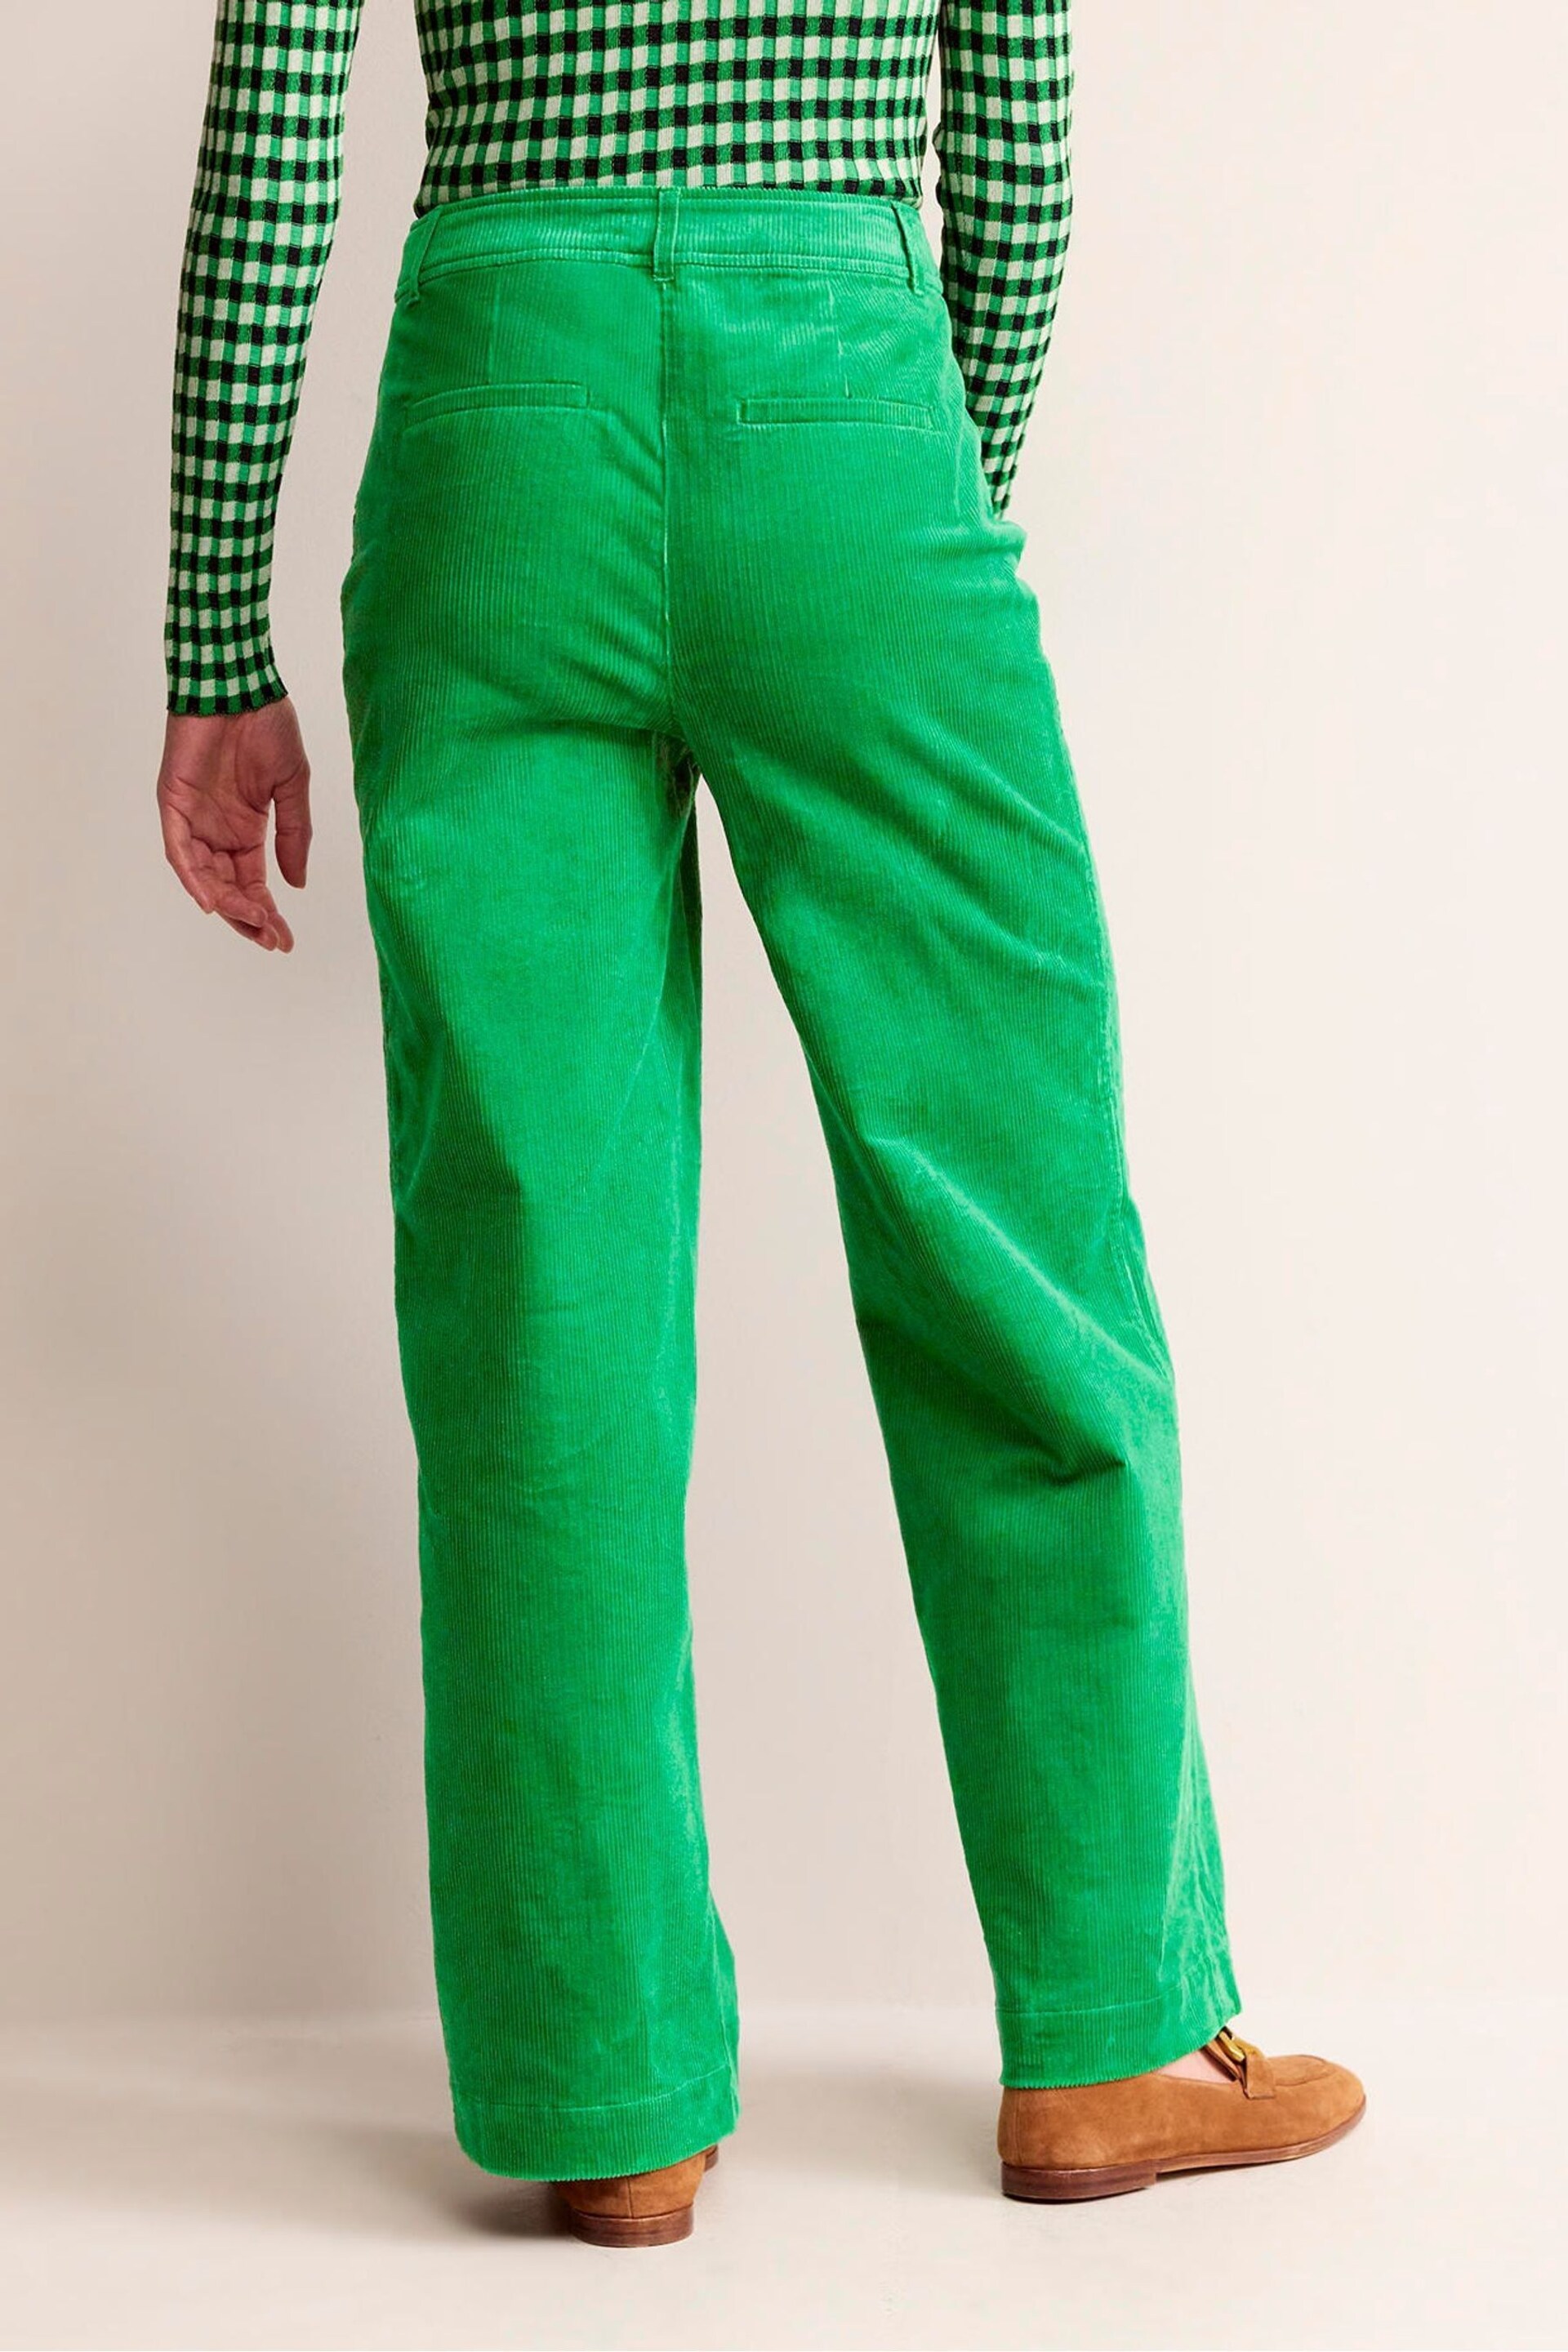 Boden Green Westbourne Corduroy Trousers - Image 2 of 4